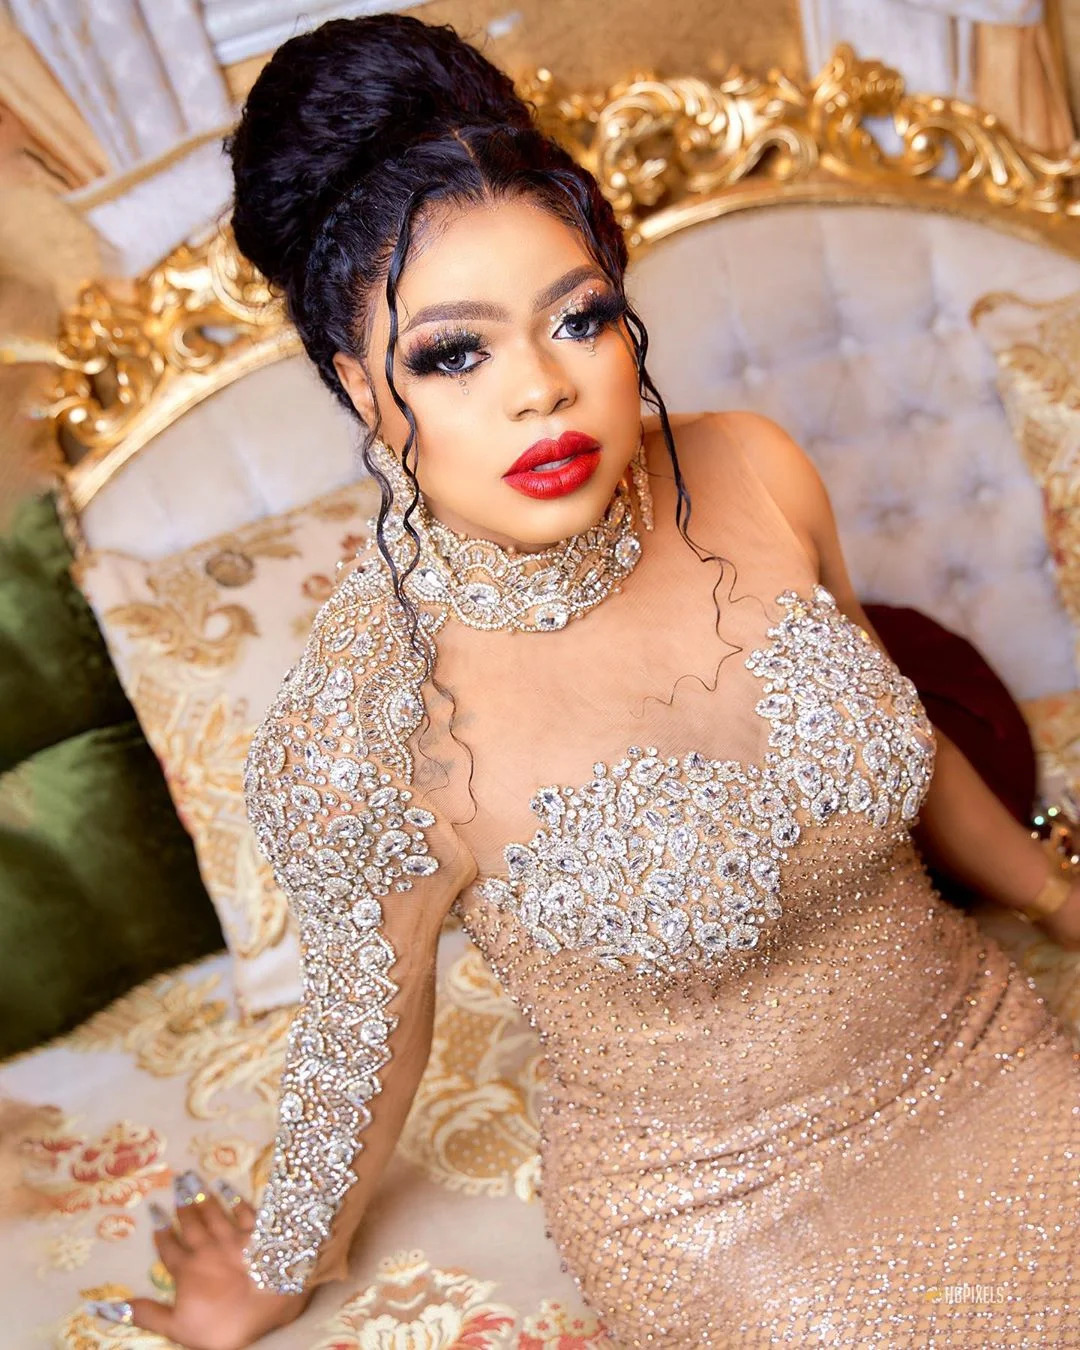 Bobrisky faces 6 months in jail for Naira accident